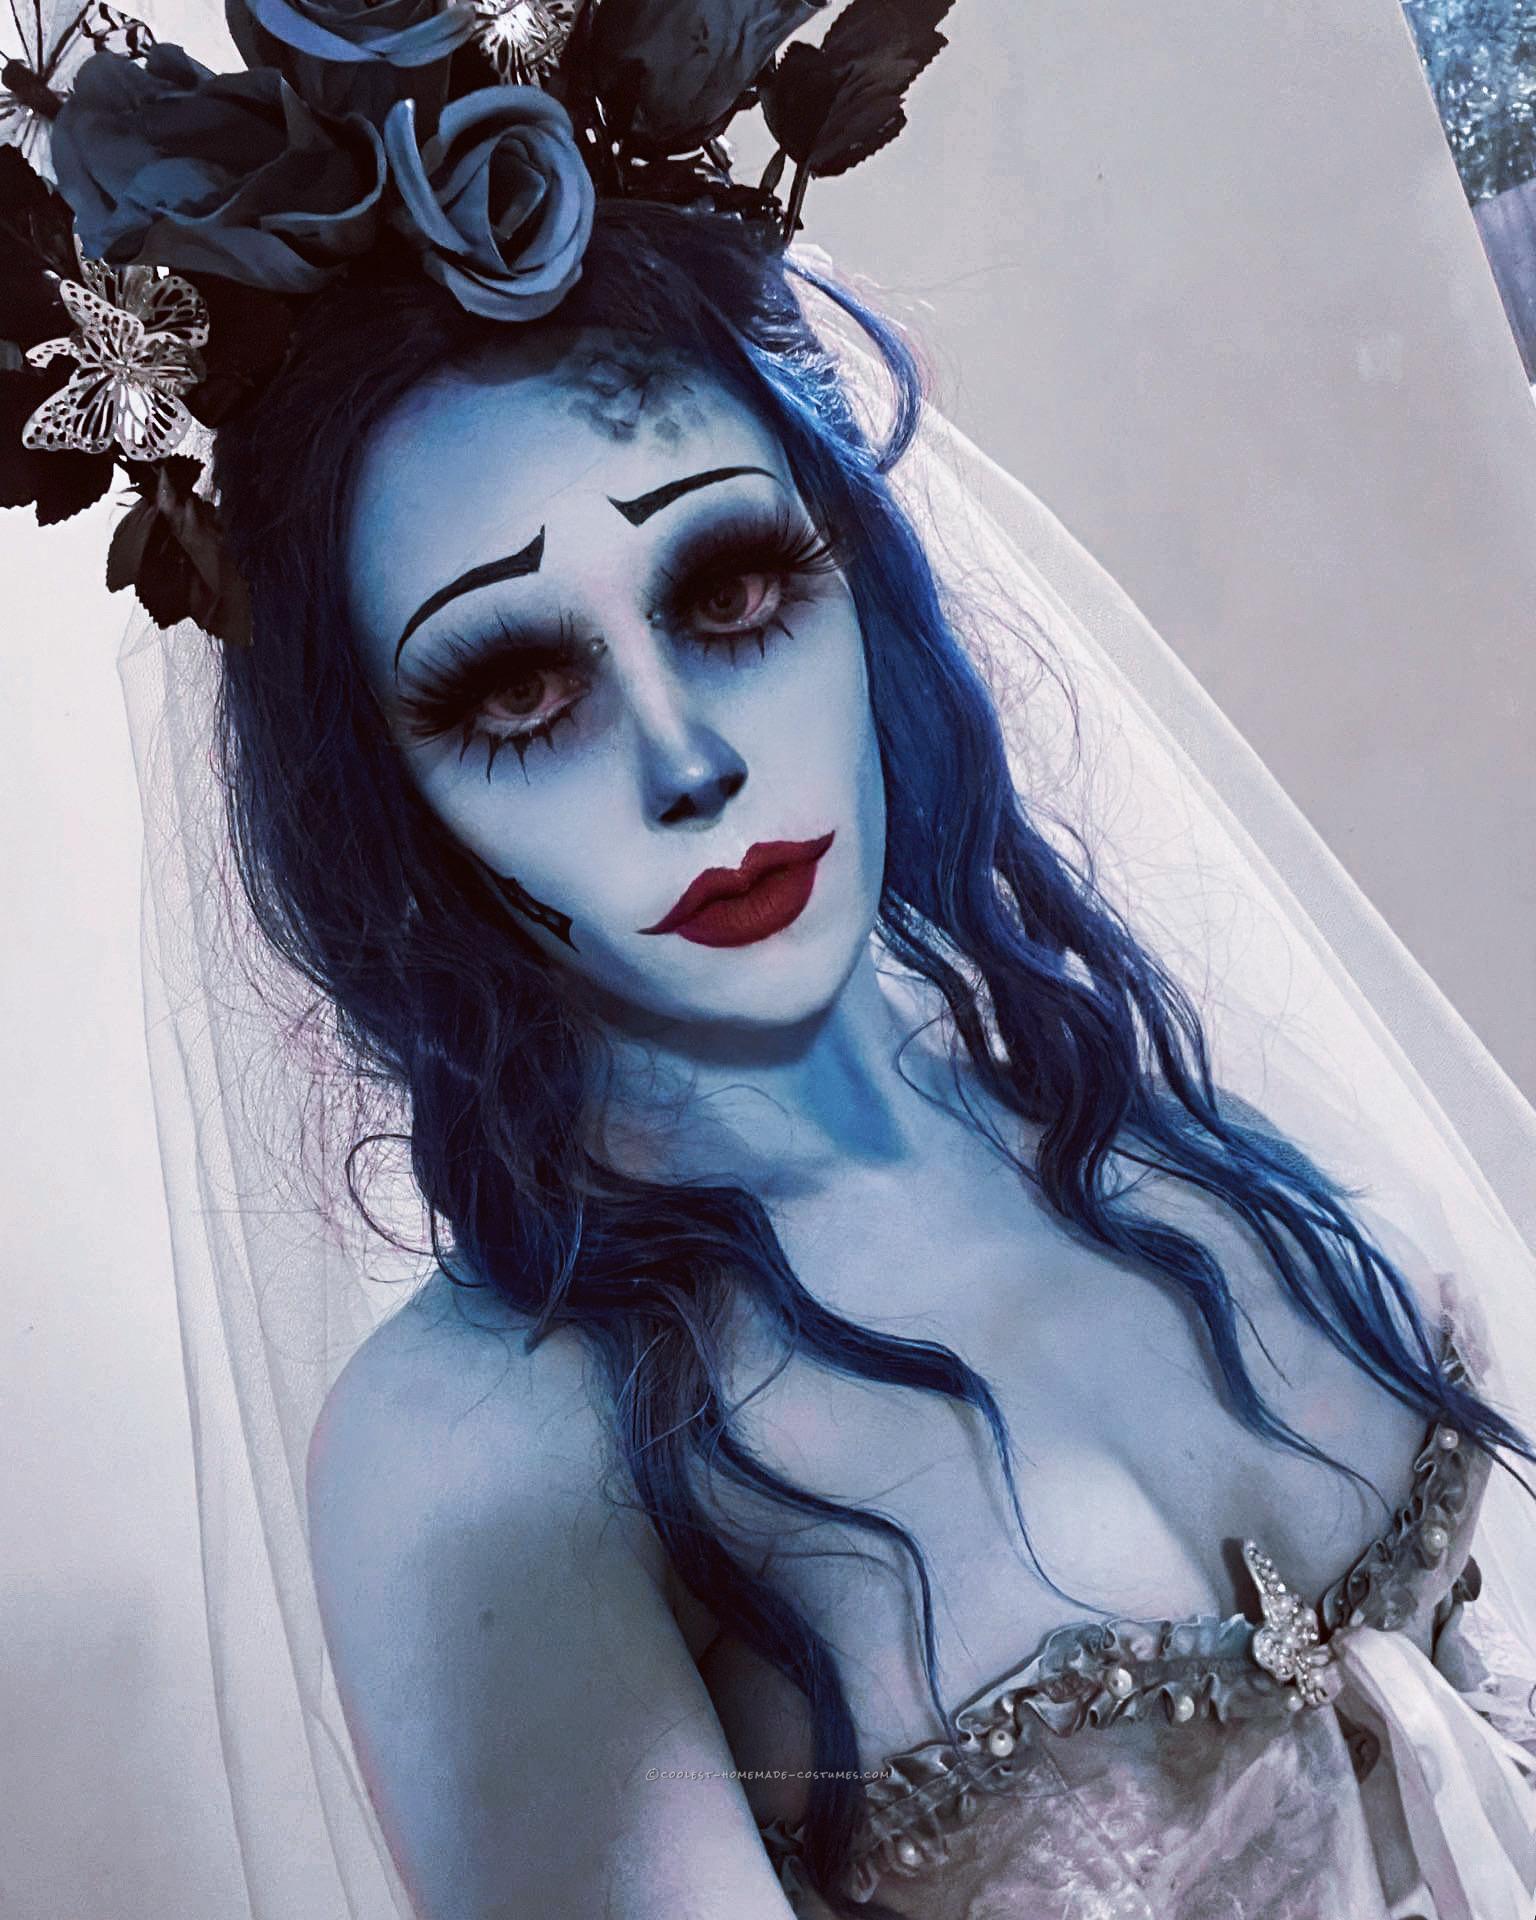 Emily, the Corpse Bride, homemade cosplay